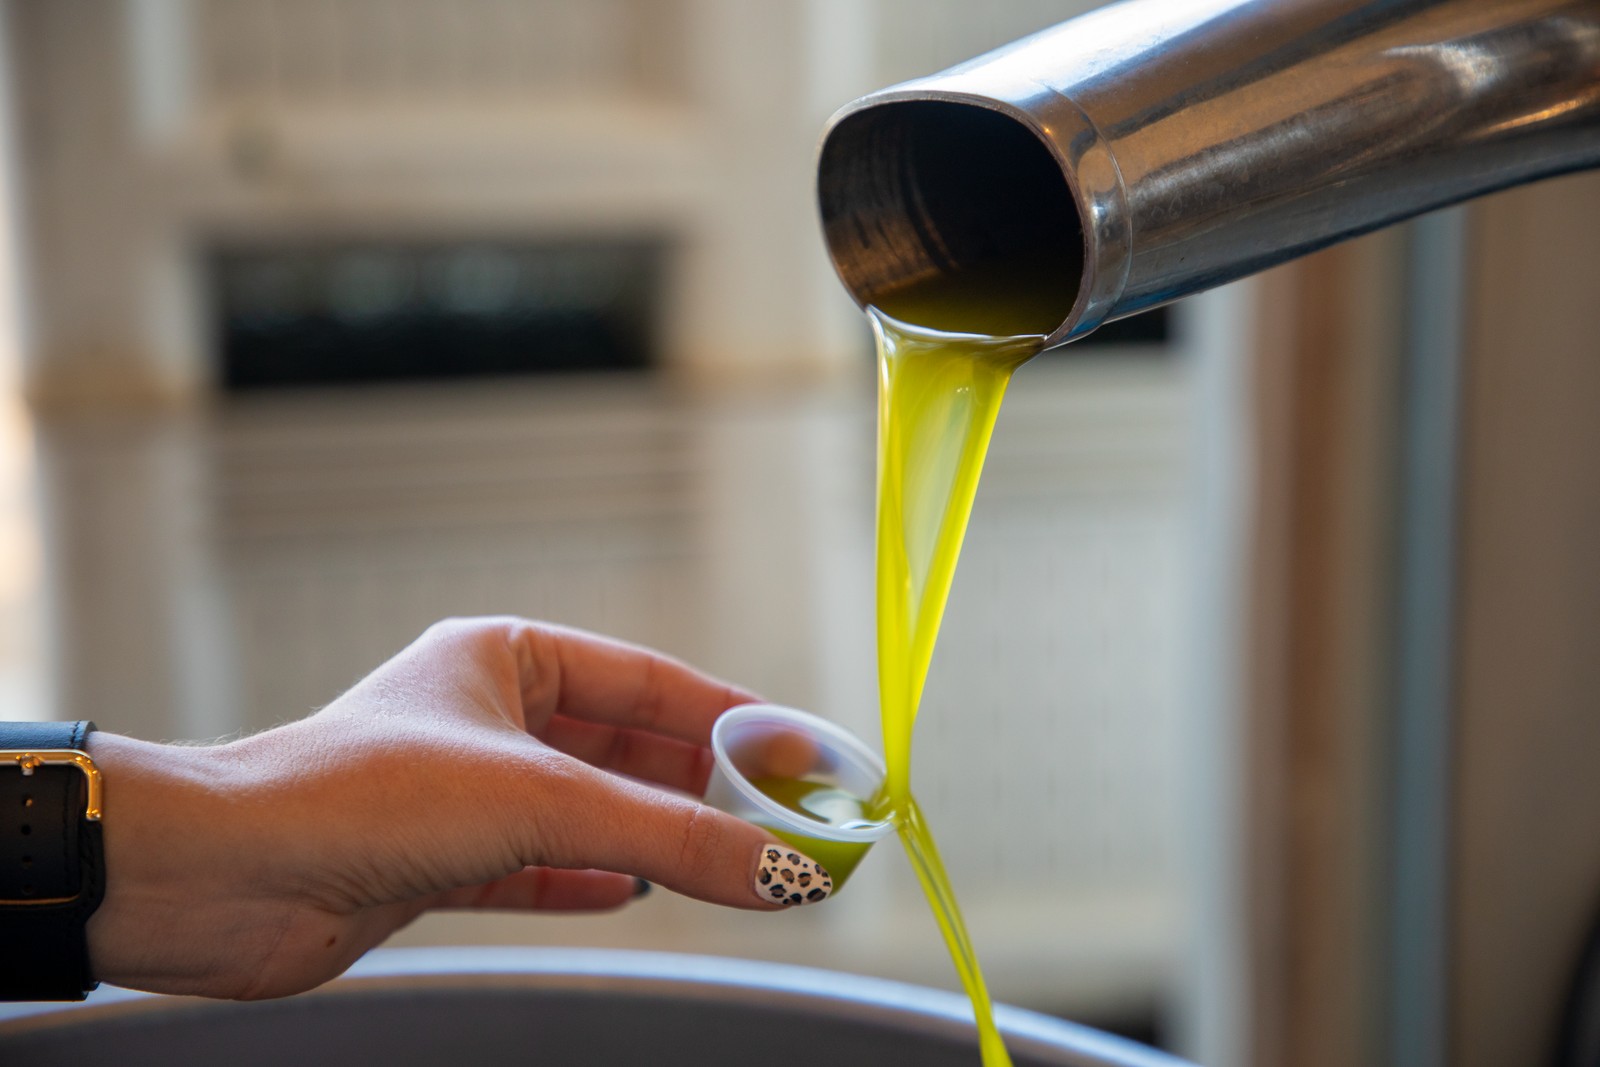 Paolivo olive oil being poured